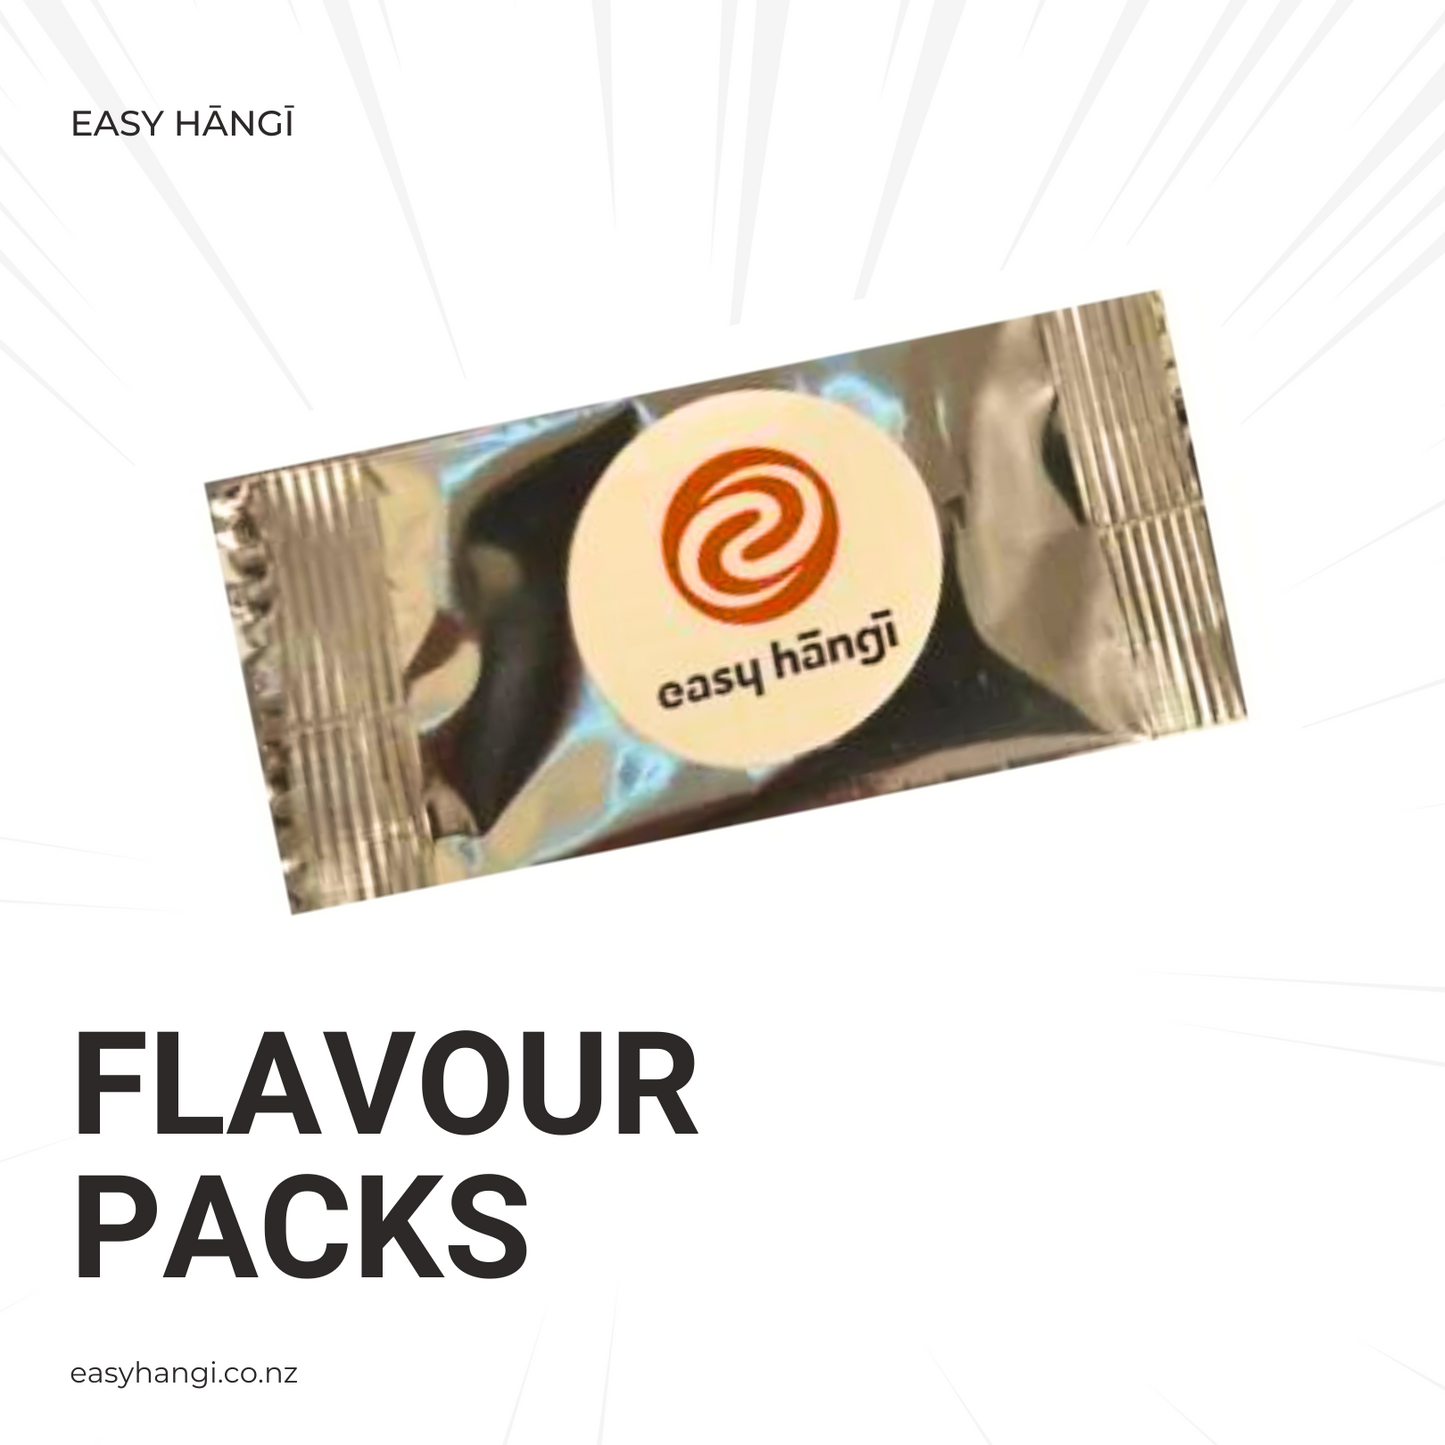 Flavour packs have 2 sticks inside ❄️ Store in Freezer ❄️